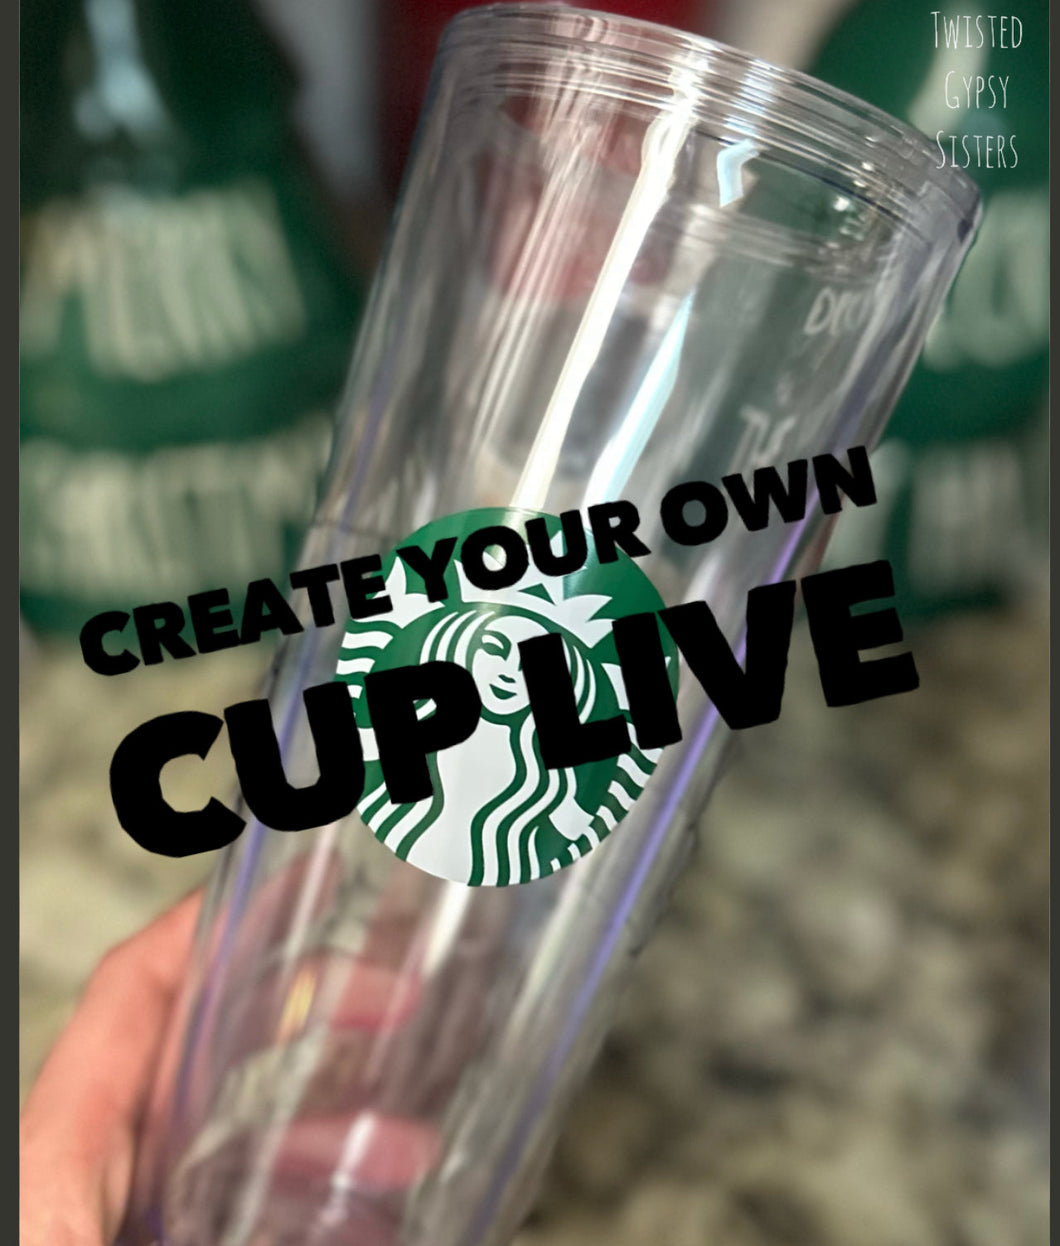 Epoxy overlay Create your own cup live. No